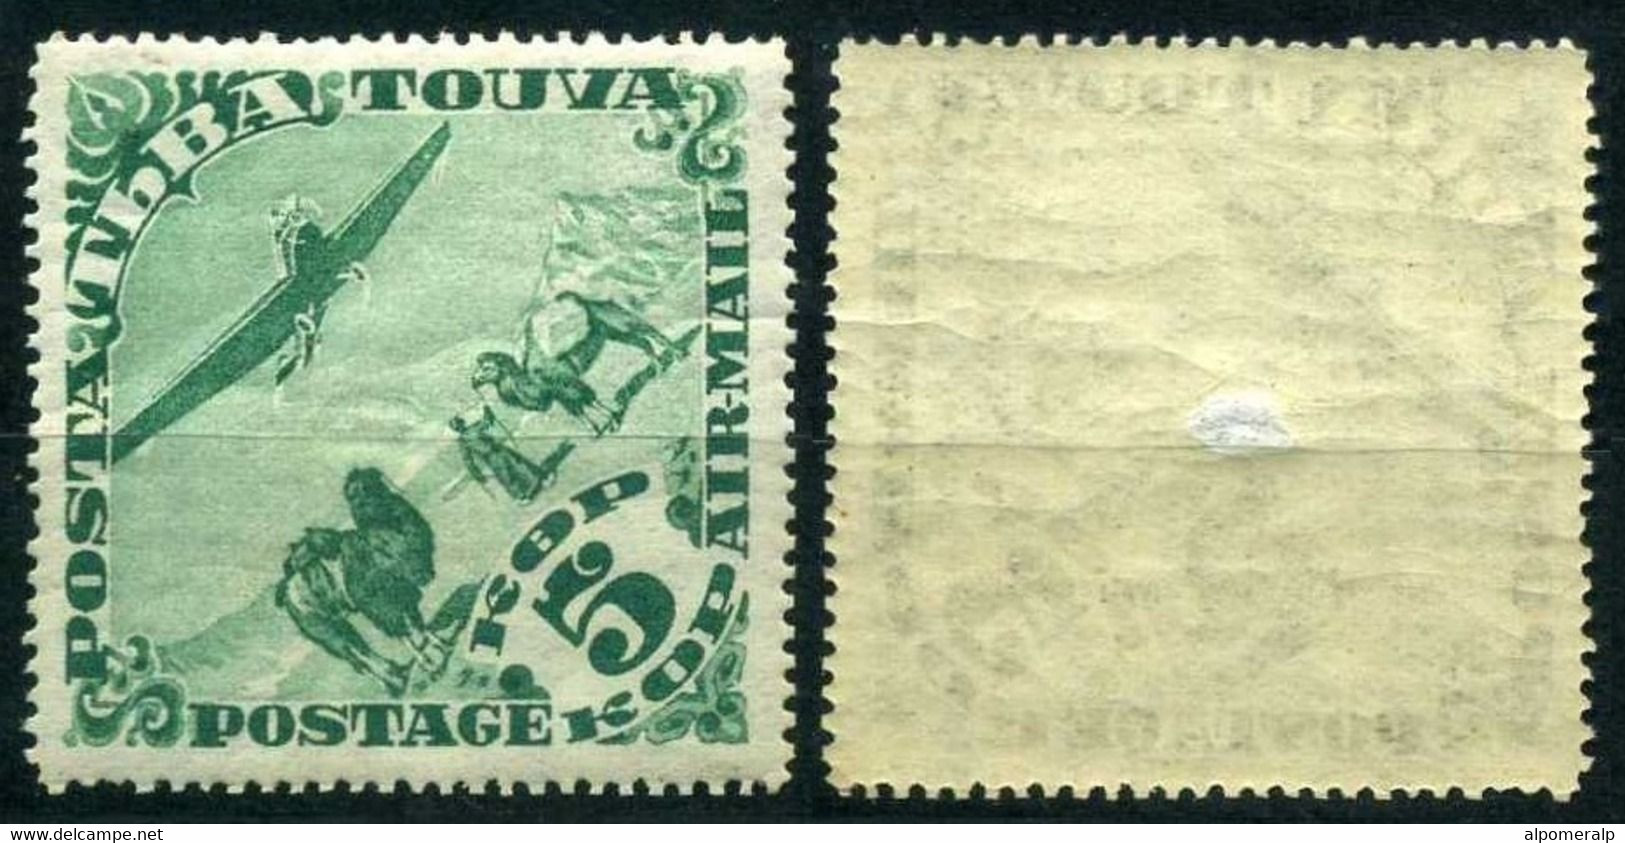 TANNU-TUVA 1934 (*) - Mi. 49-57 (I & II), Postage Stamps: Plane Over Landscapes With Animals | Air Post - Touva